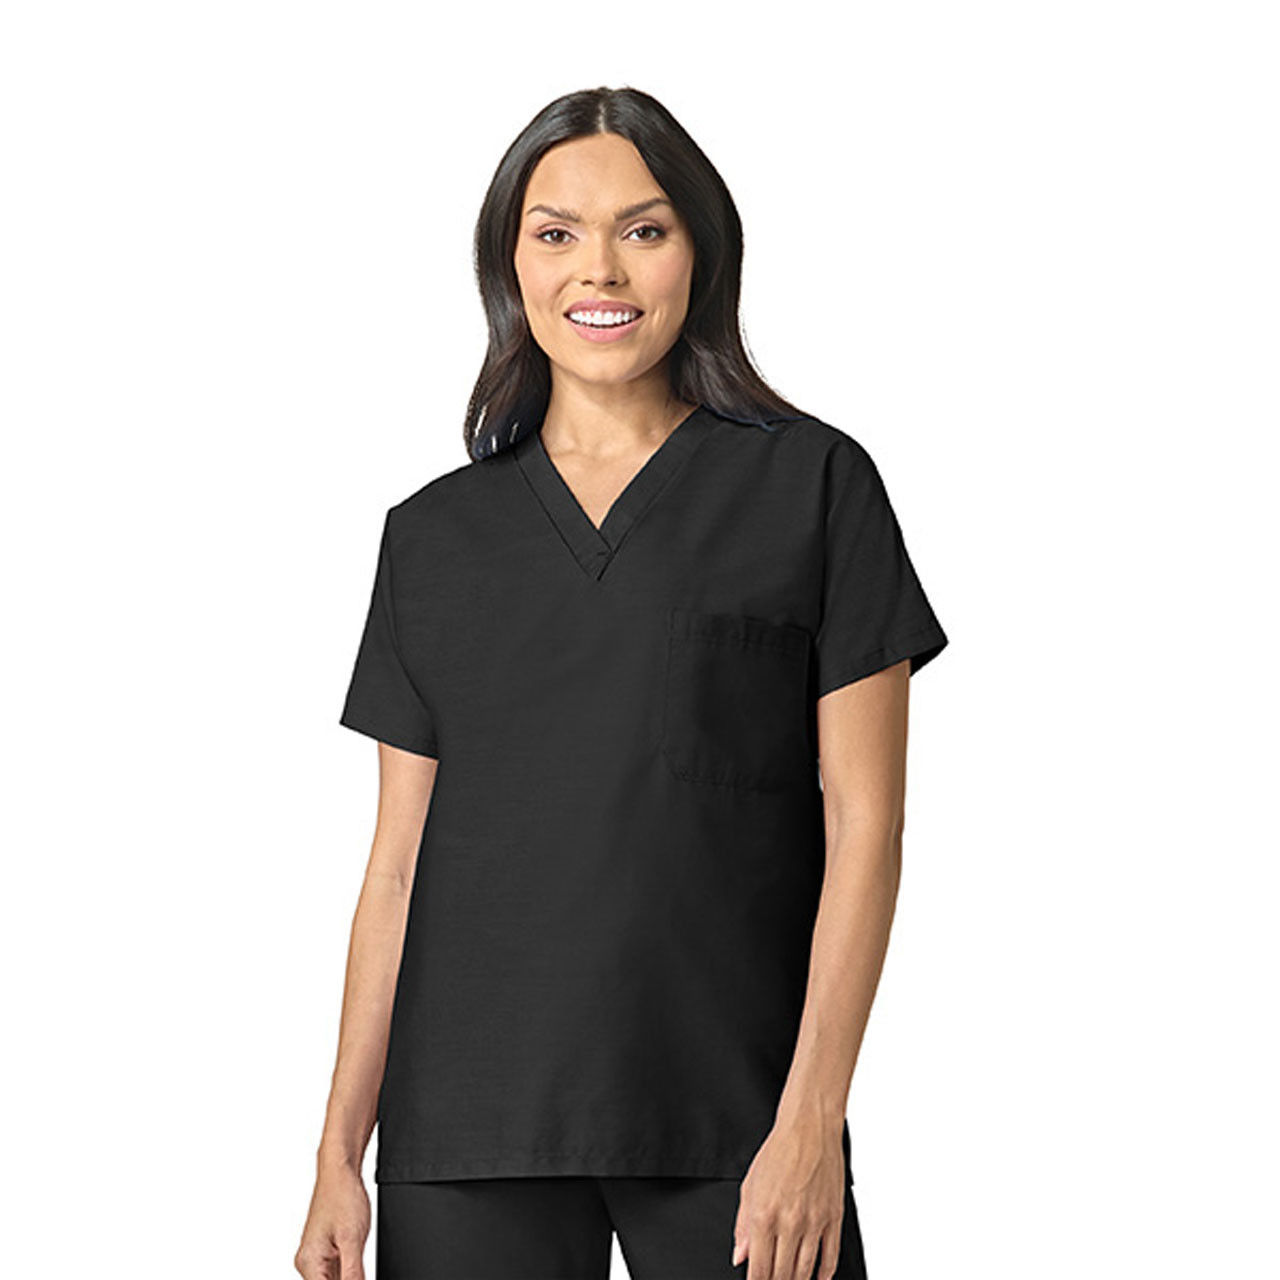 Where can the Black Scrub Tops be used?